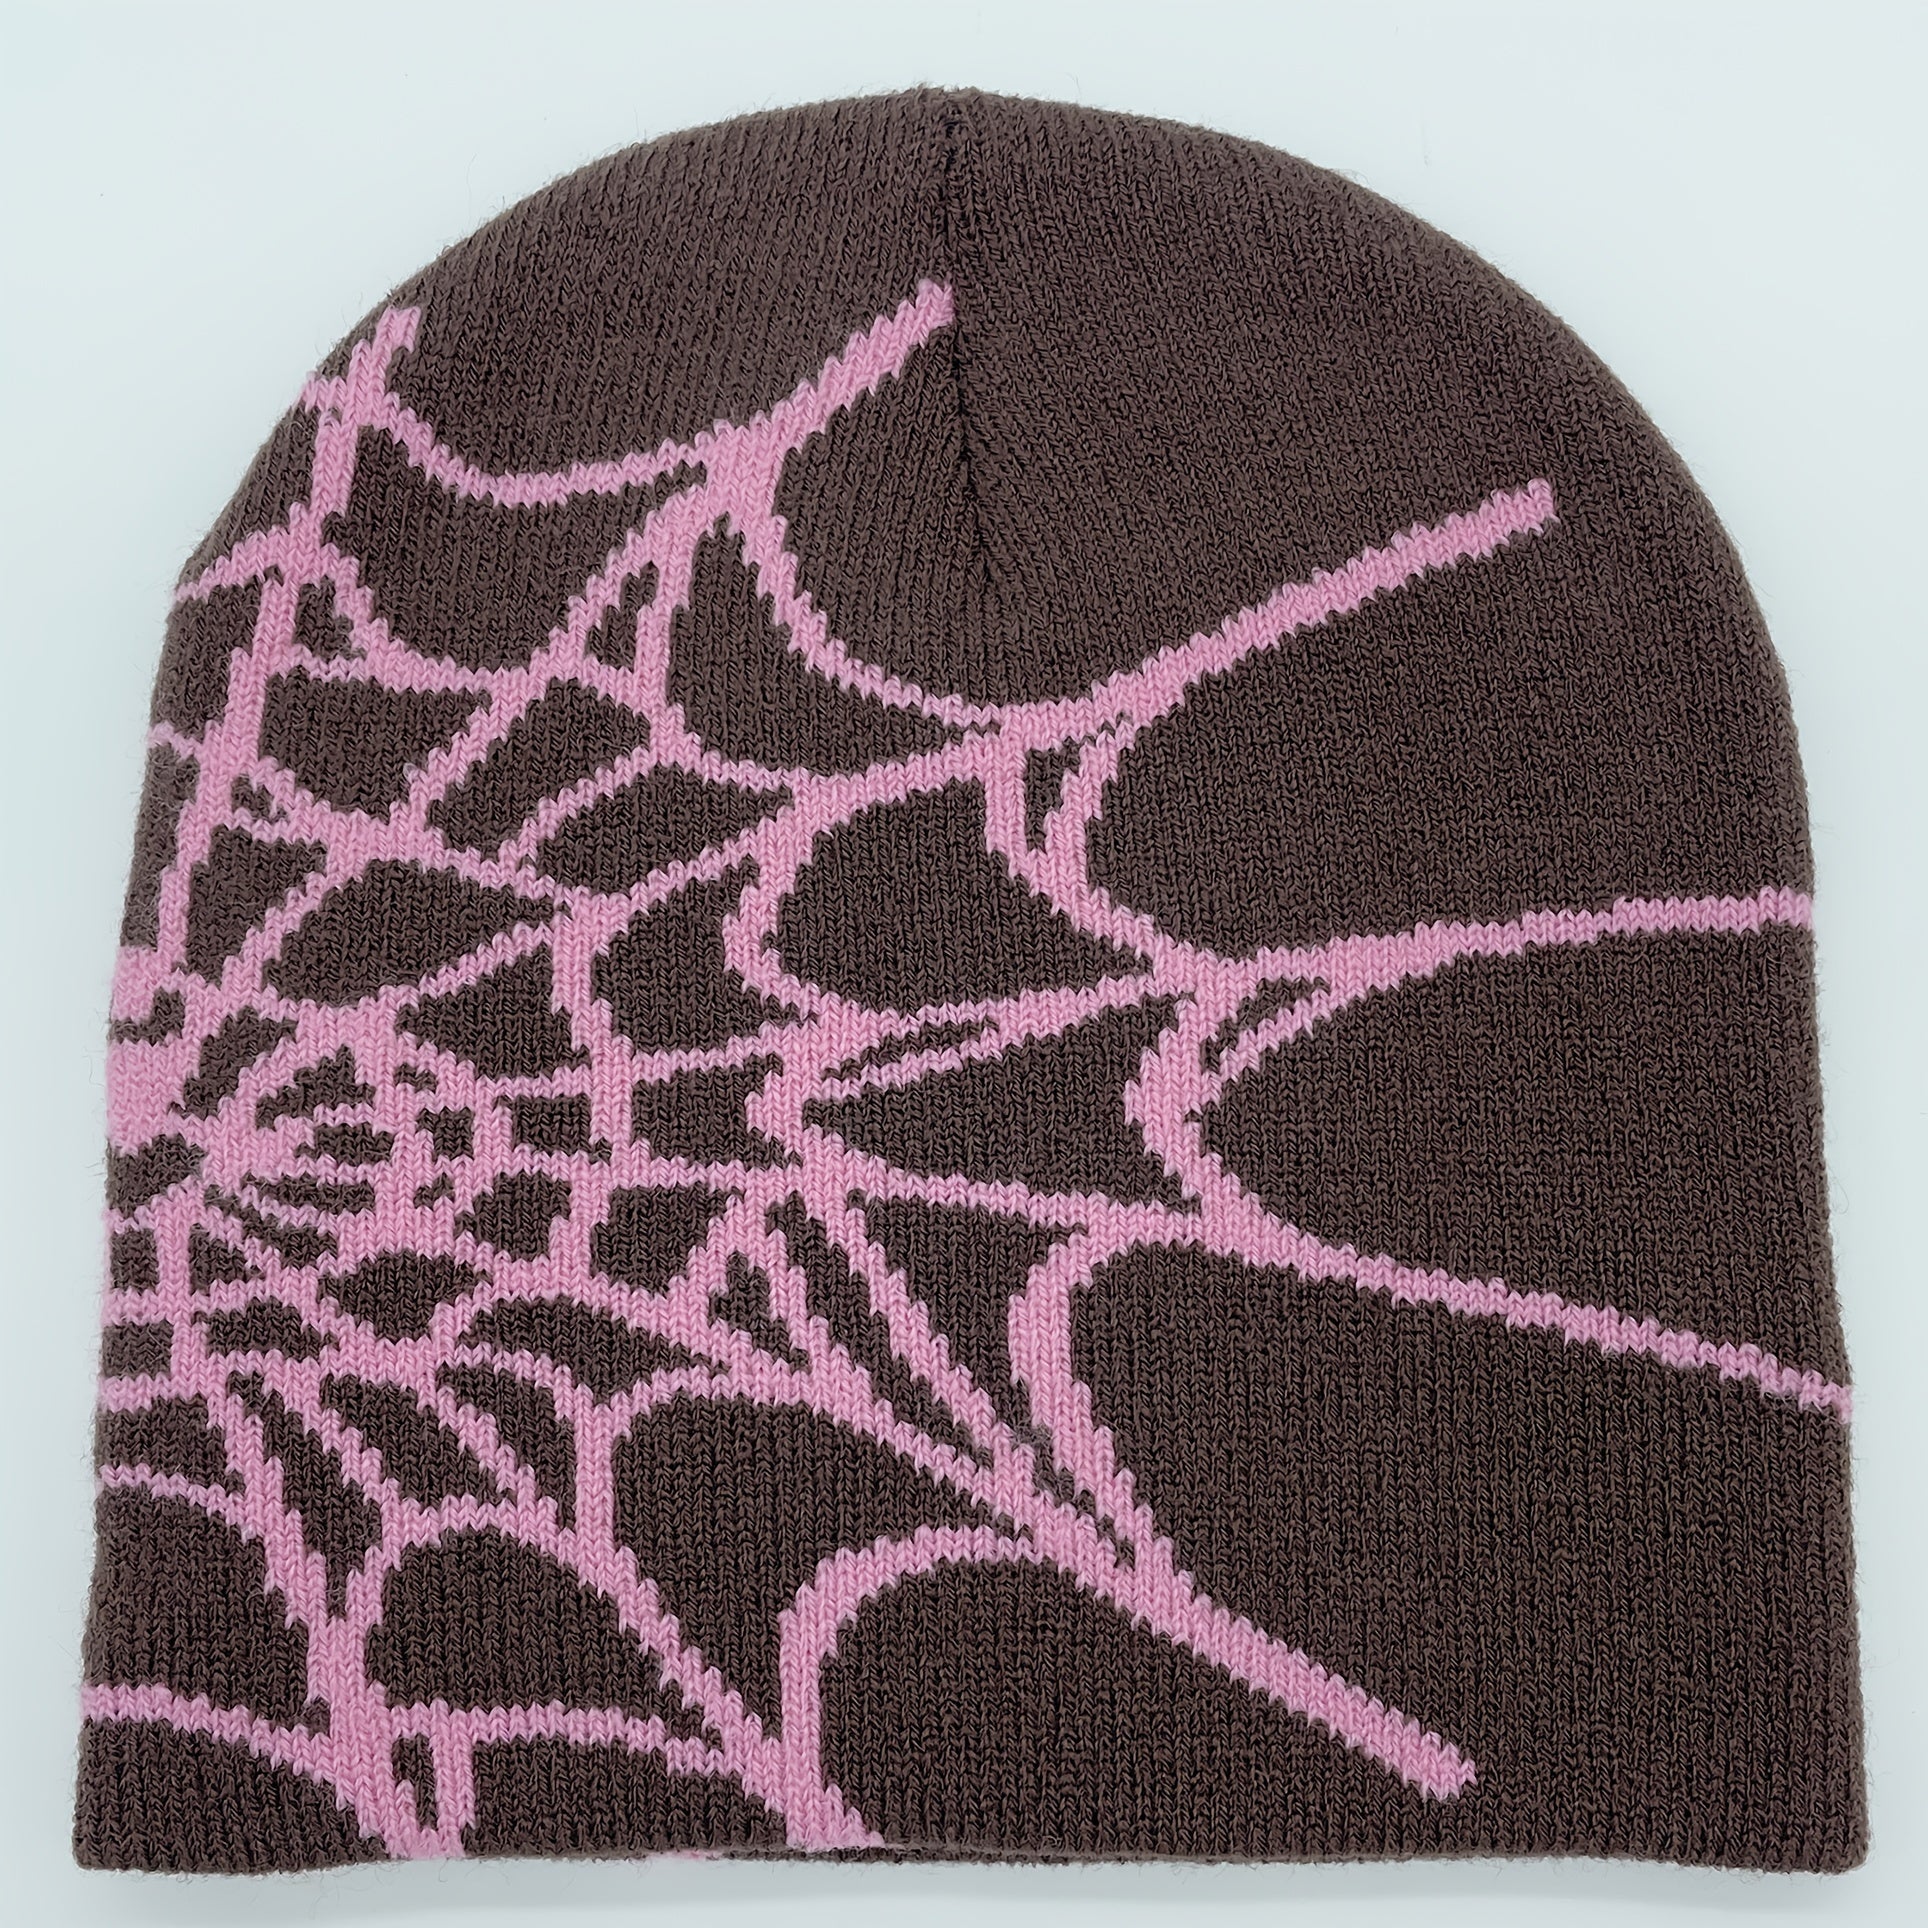 Foxeve Unisex Plain Color Slouchy Knitted Beanie Hat With Spider Web Embroidery For Autumn And Winter Christmas Gift